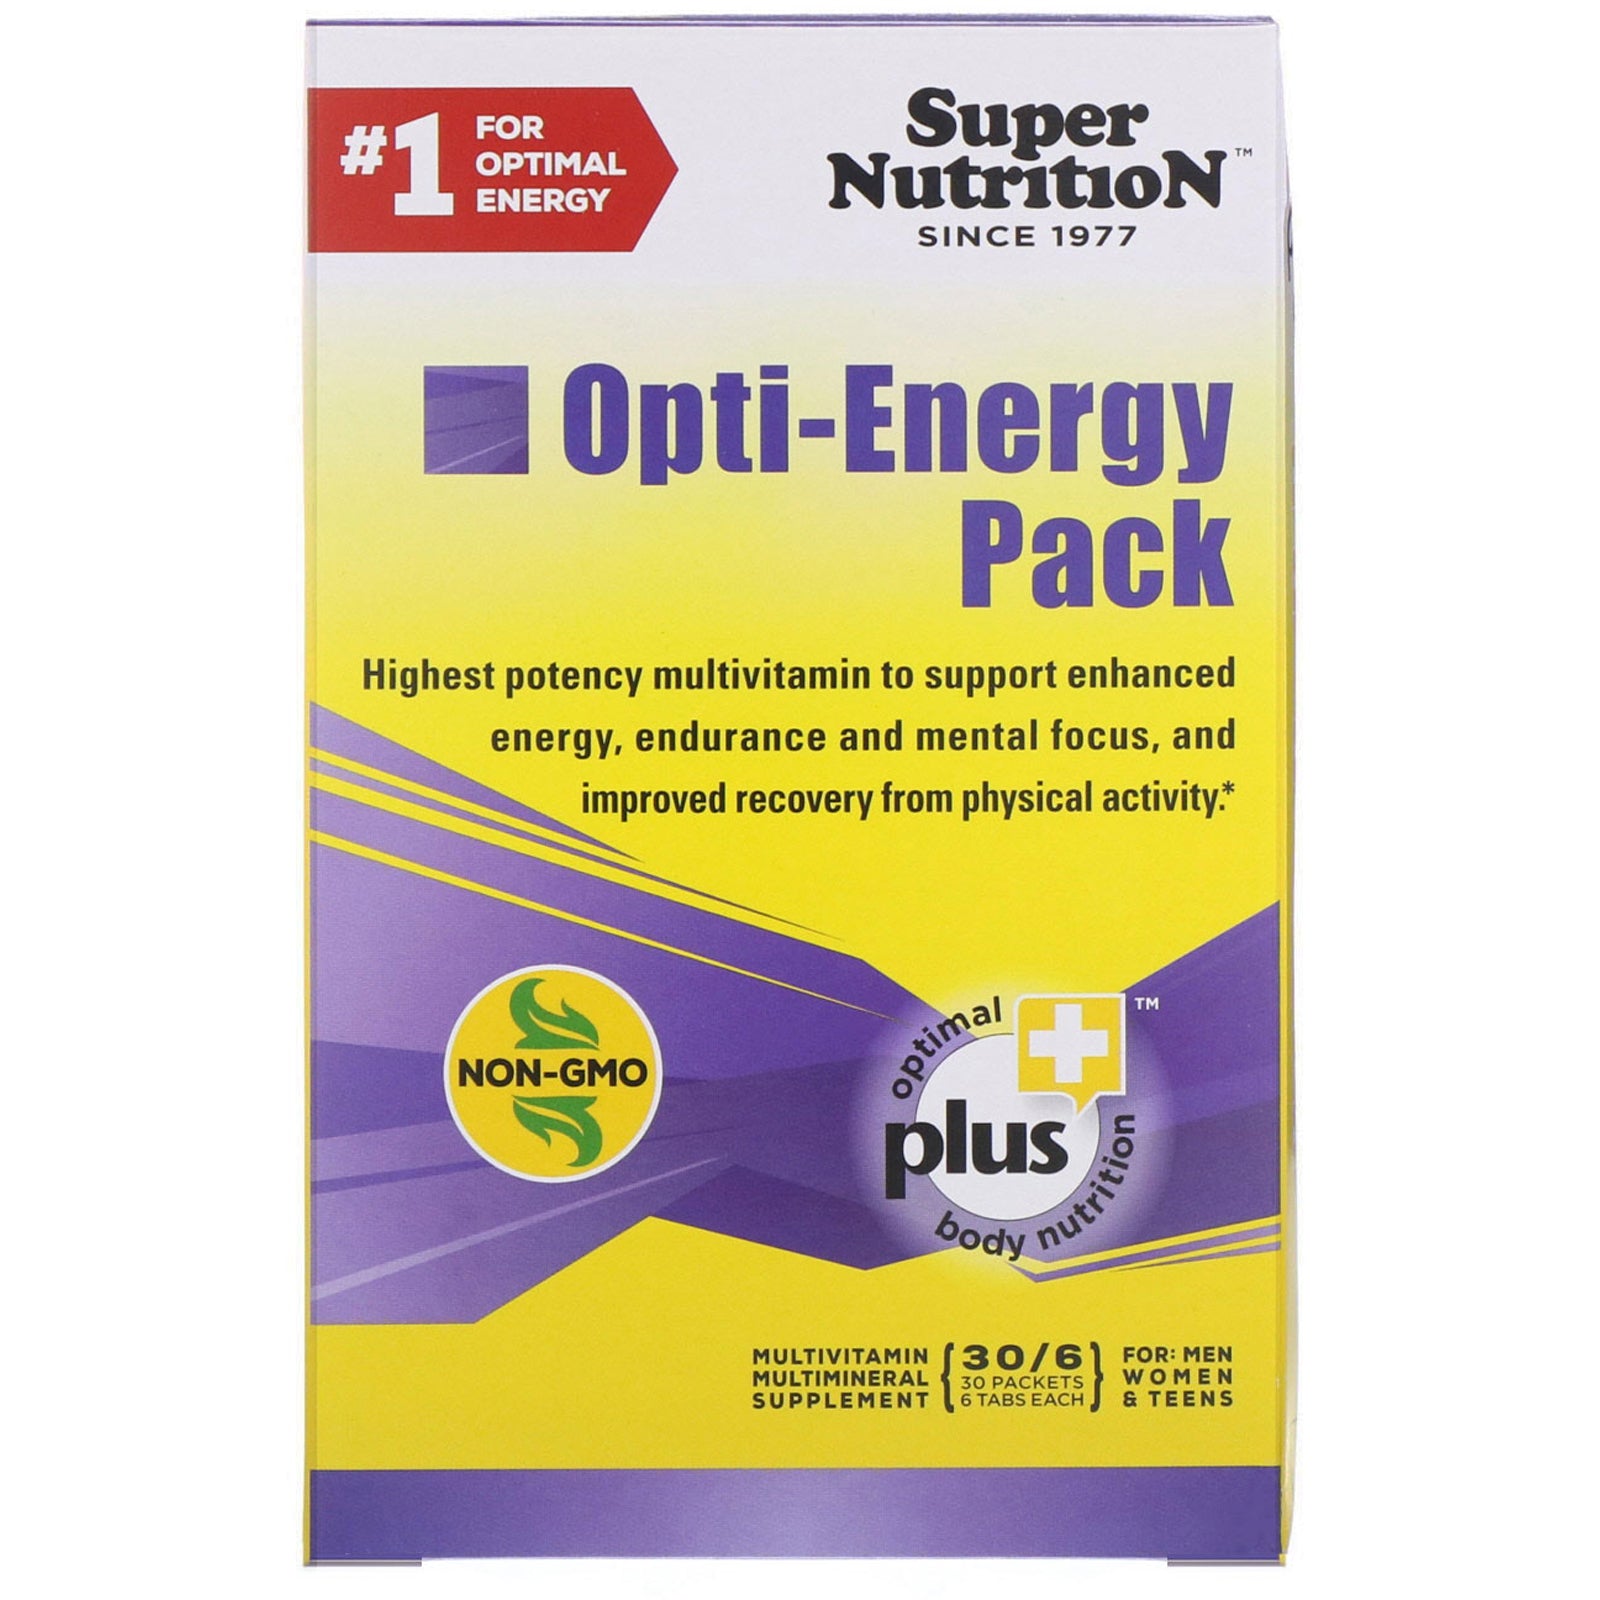 Super Nutrition, Opti-Energy Pack, MultiVitamin/Multimineral Supplement, 30 Packets, (6 Tabs Each)